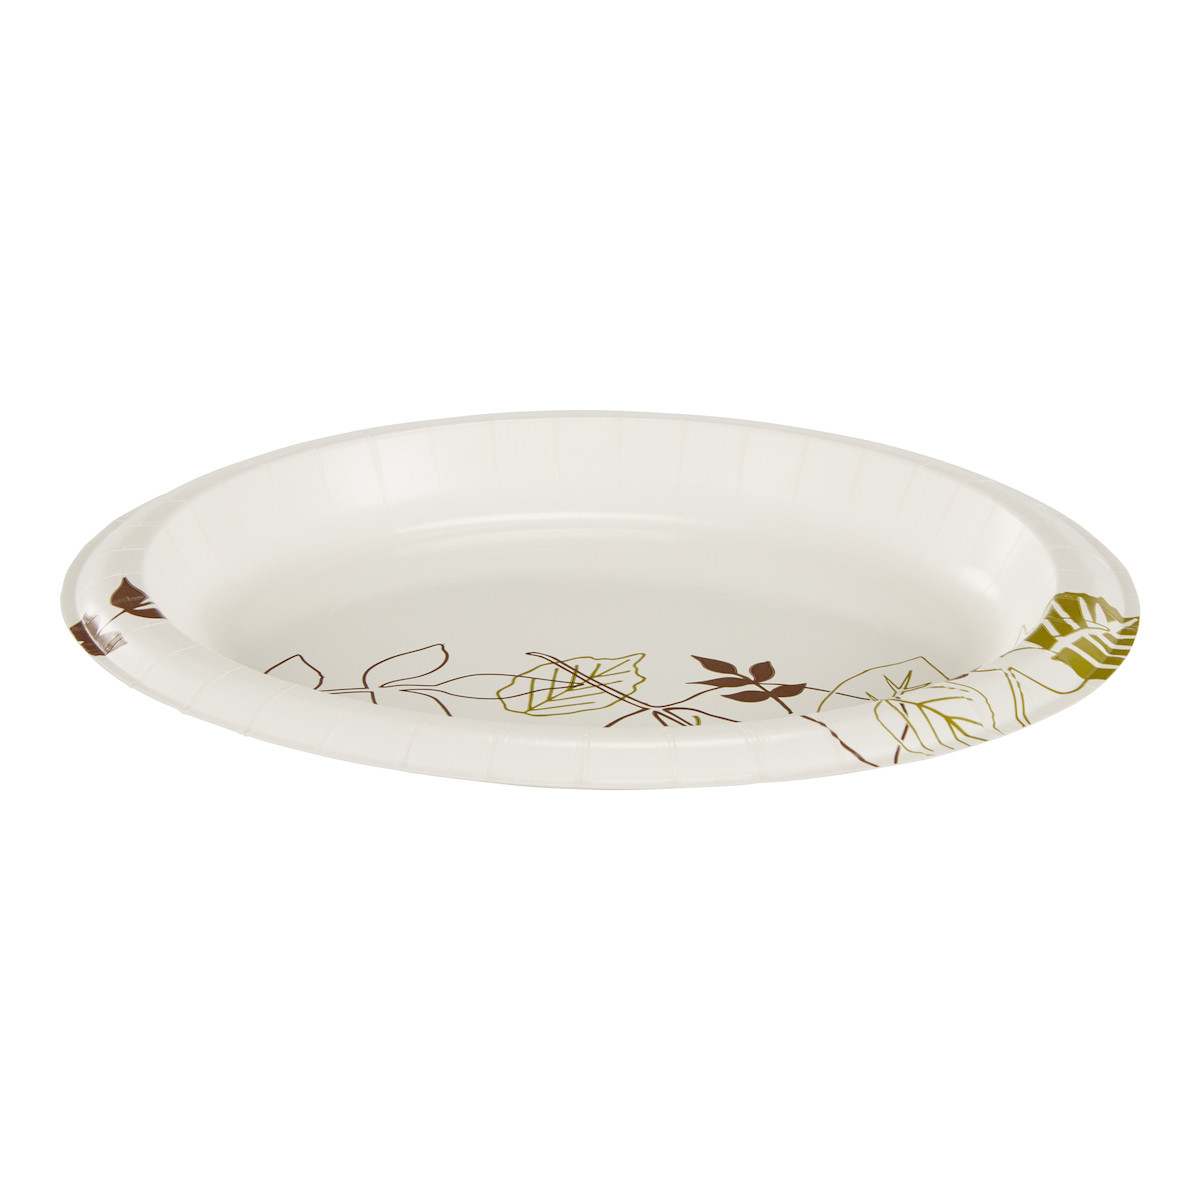 DXEUX7WS - Dixie Pathways 7 Medium-weight Paper Plates by GP Pro, DXE UX7WS